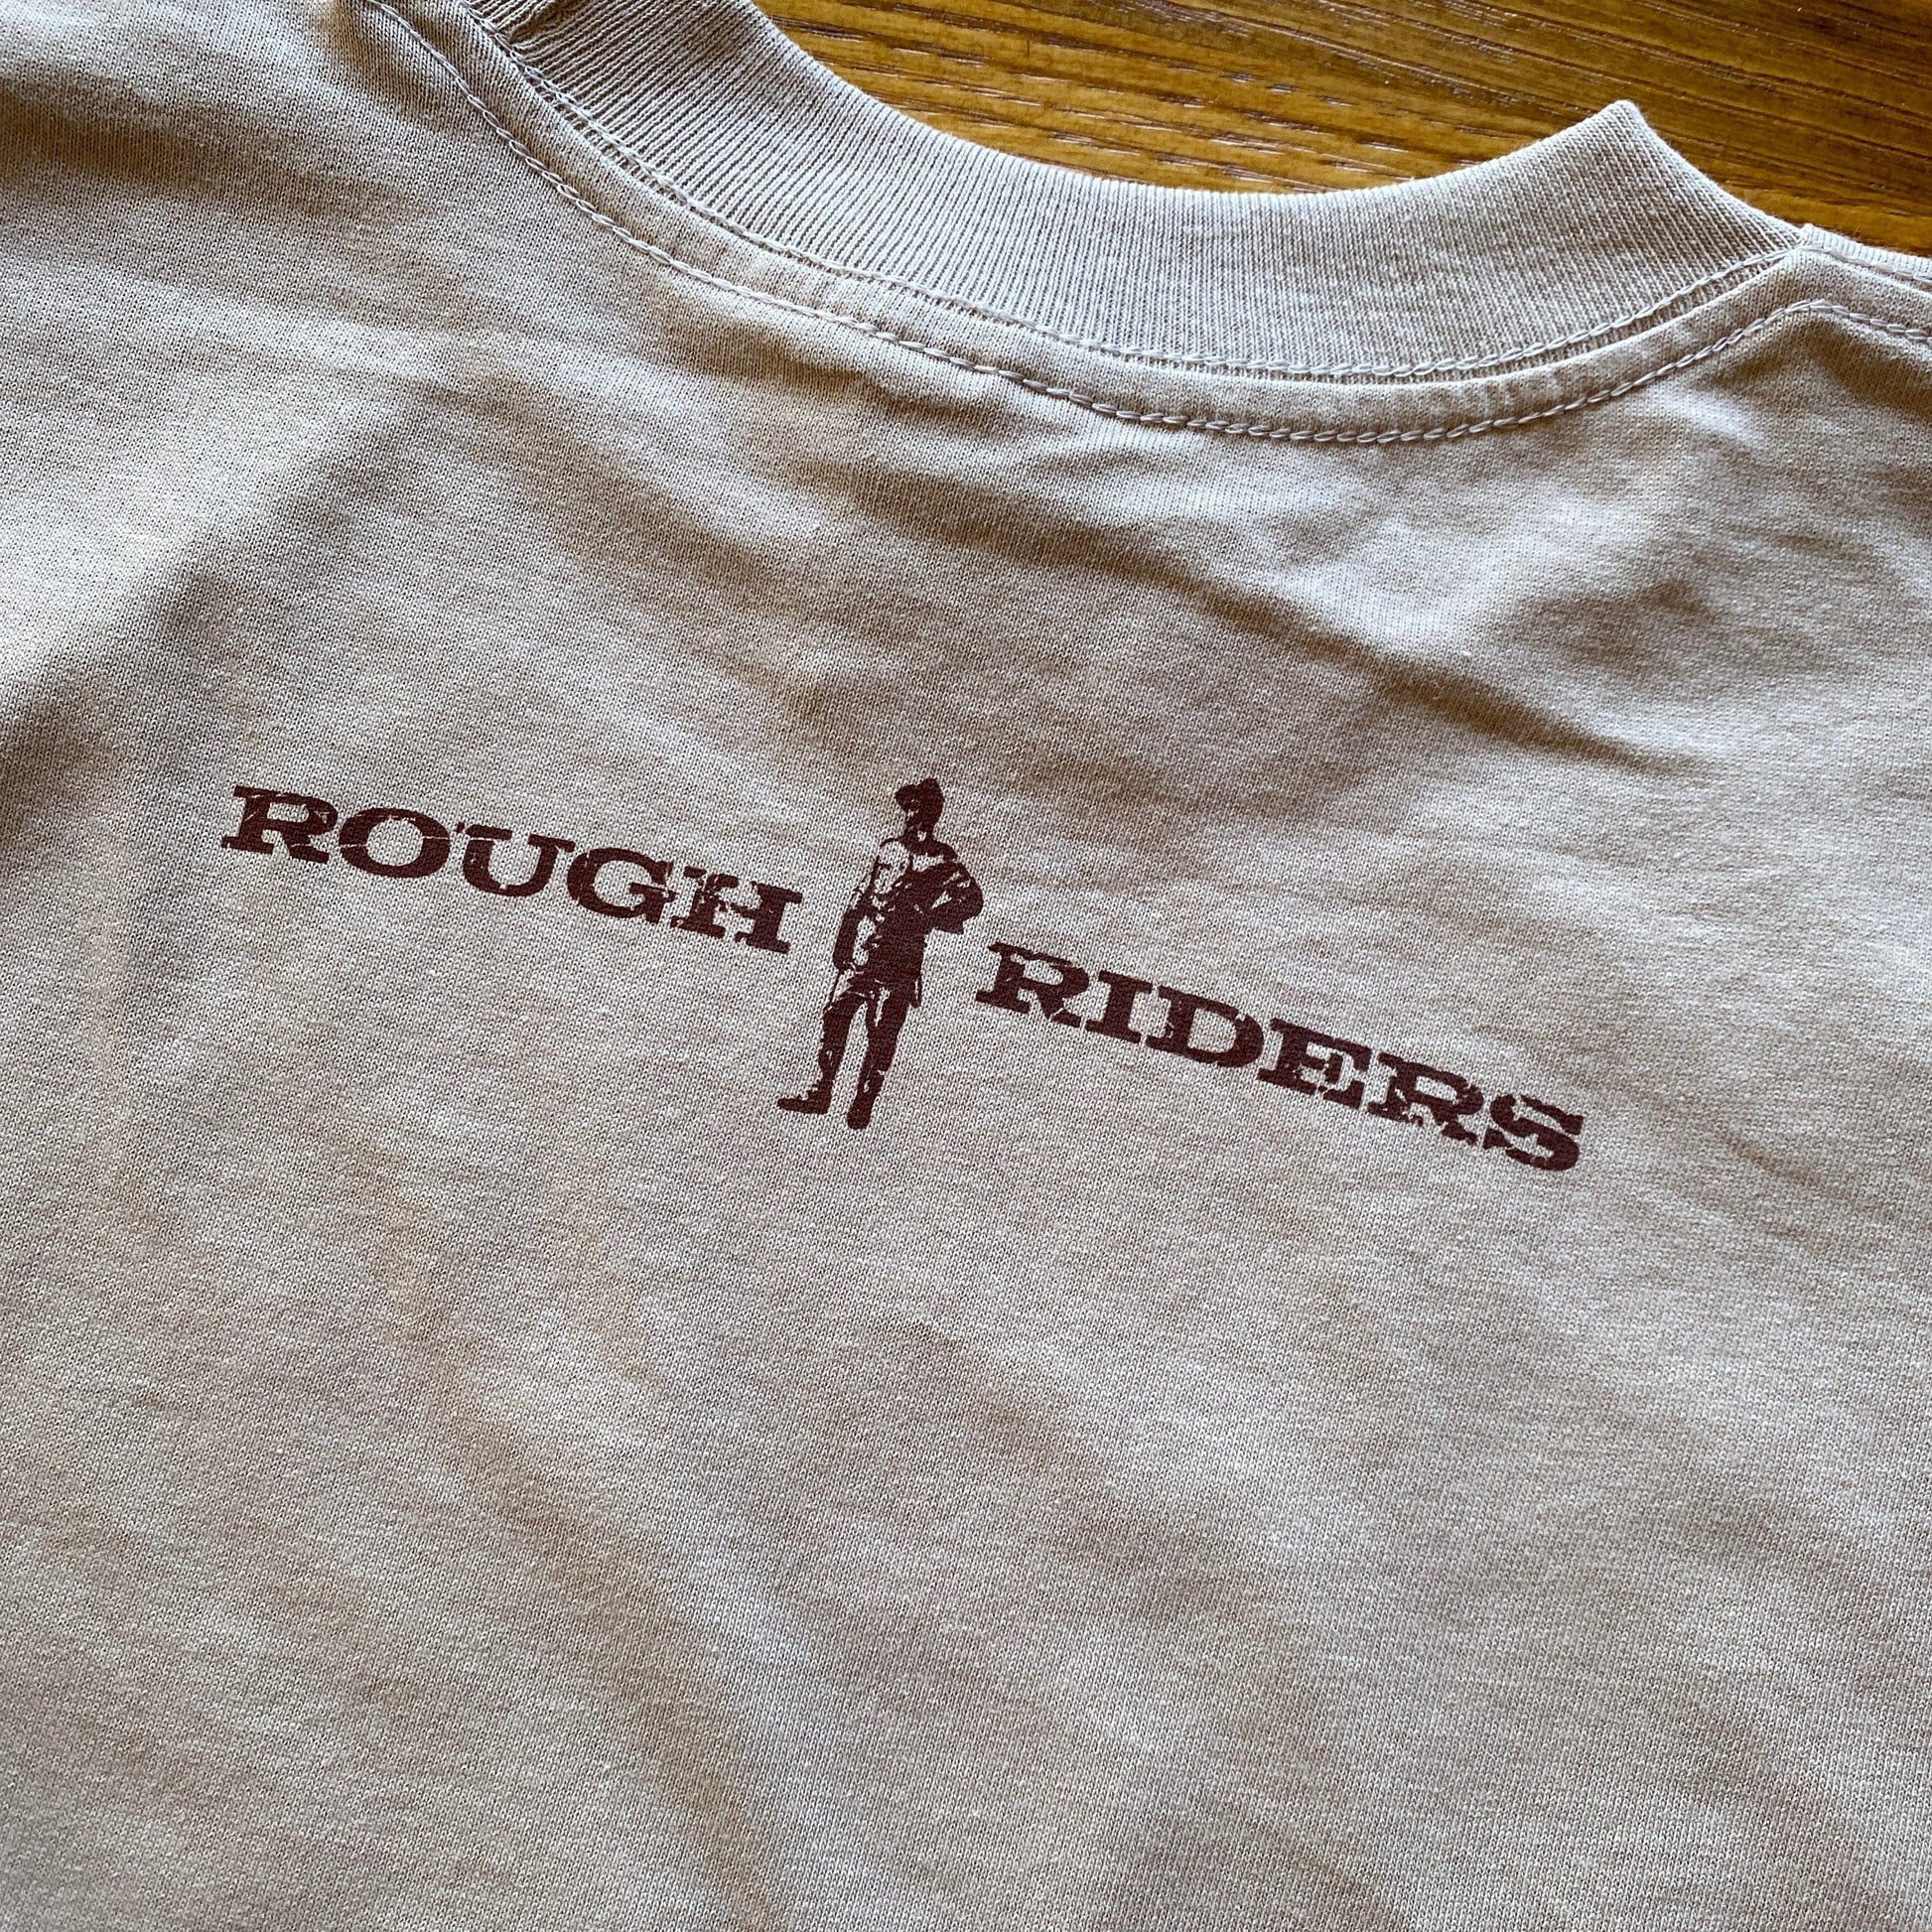 Close-up back Teddy Roosevelt "Rough Riders" Long-sleeved shirt from the History List Store